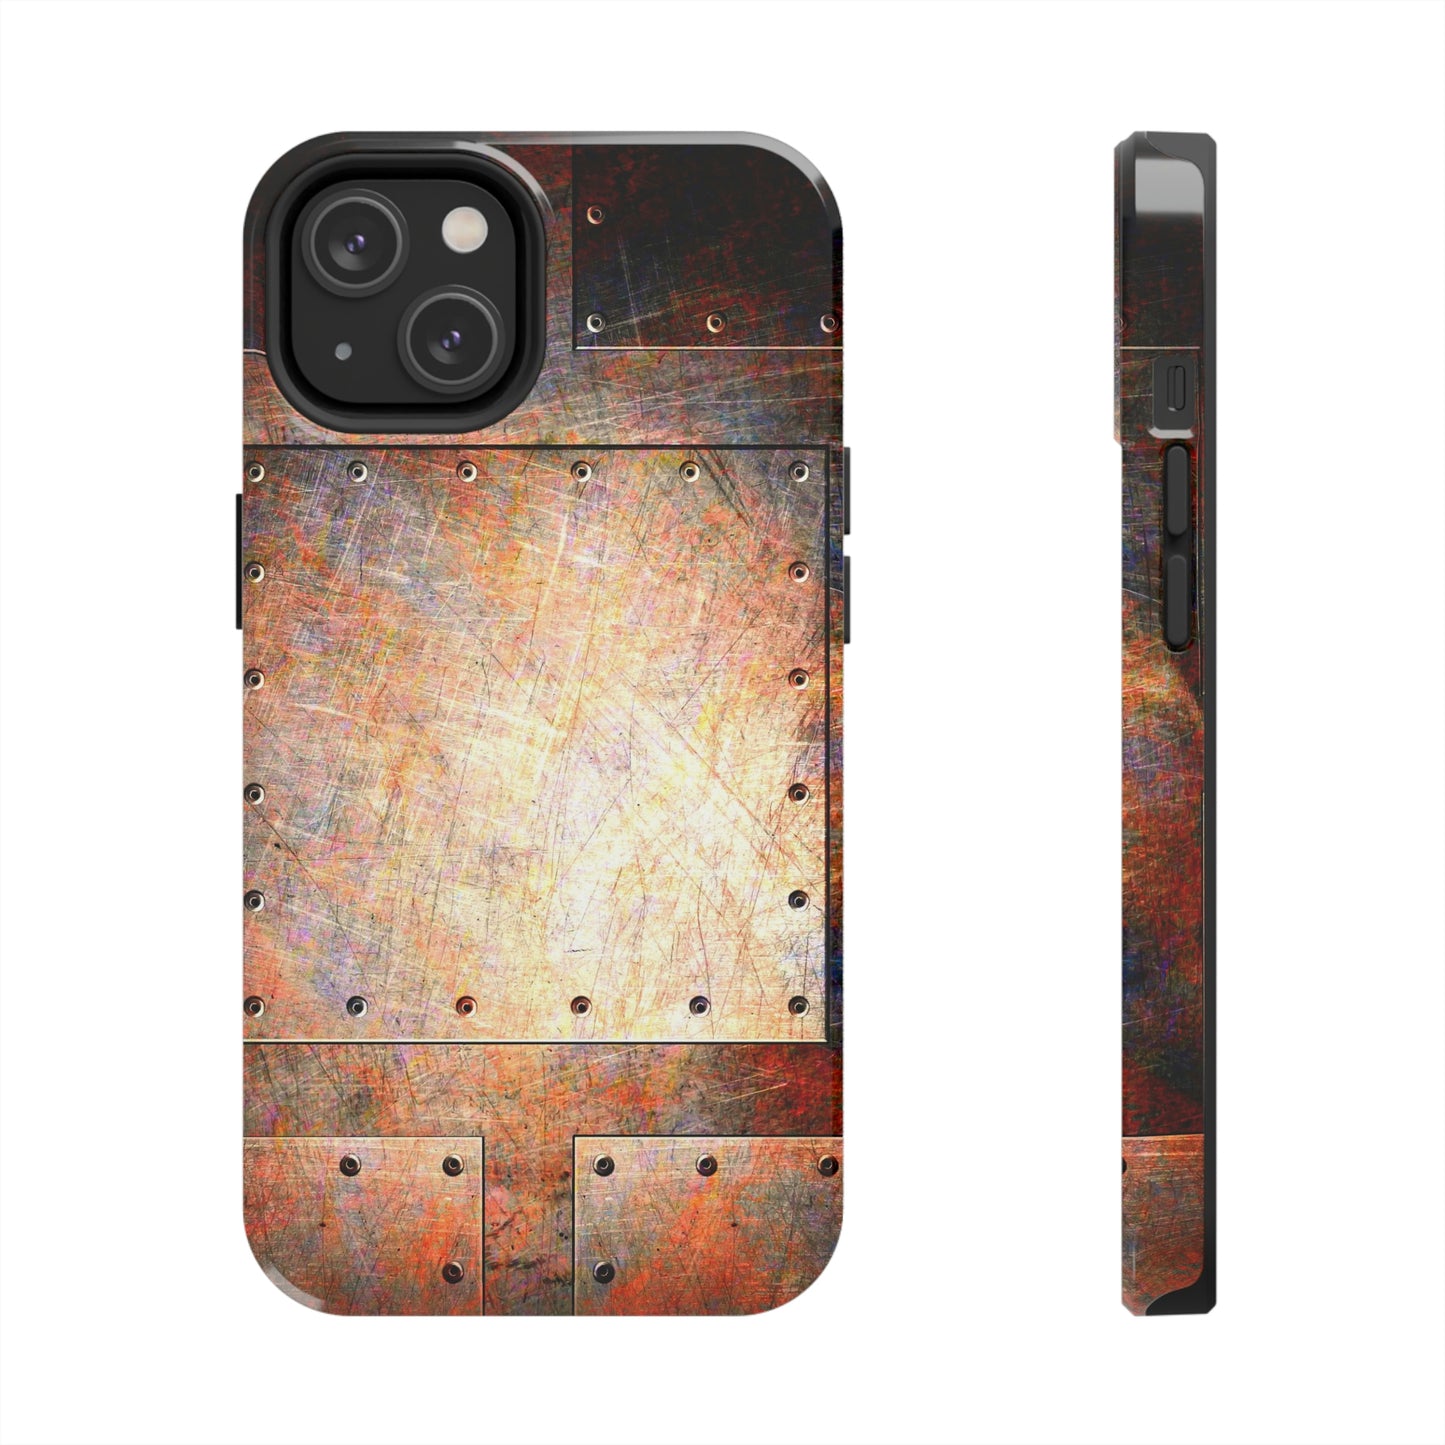 Steampunk Themed Tough Case for iPhone 14 - Rusted Riveted Metal Plates Print Phone Case for iPhone 14